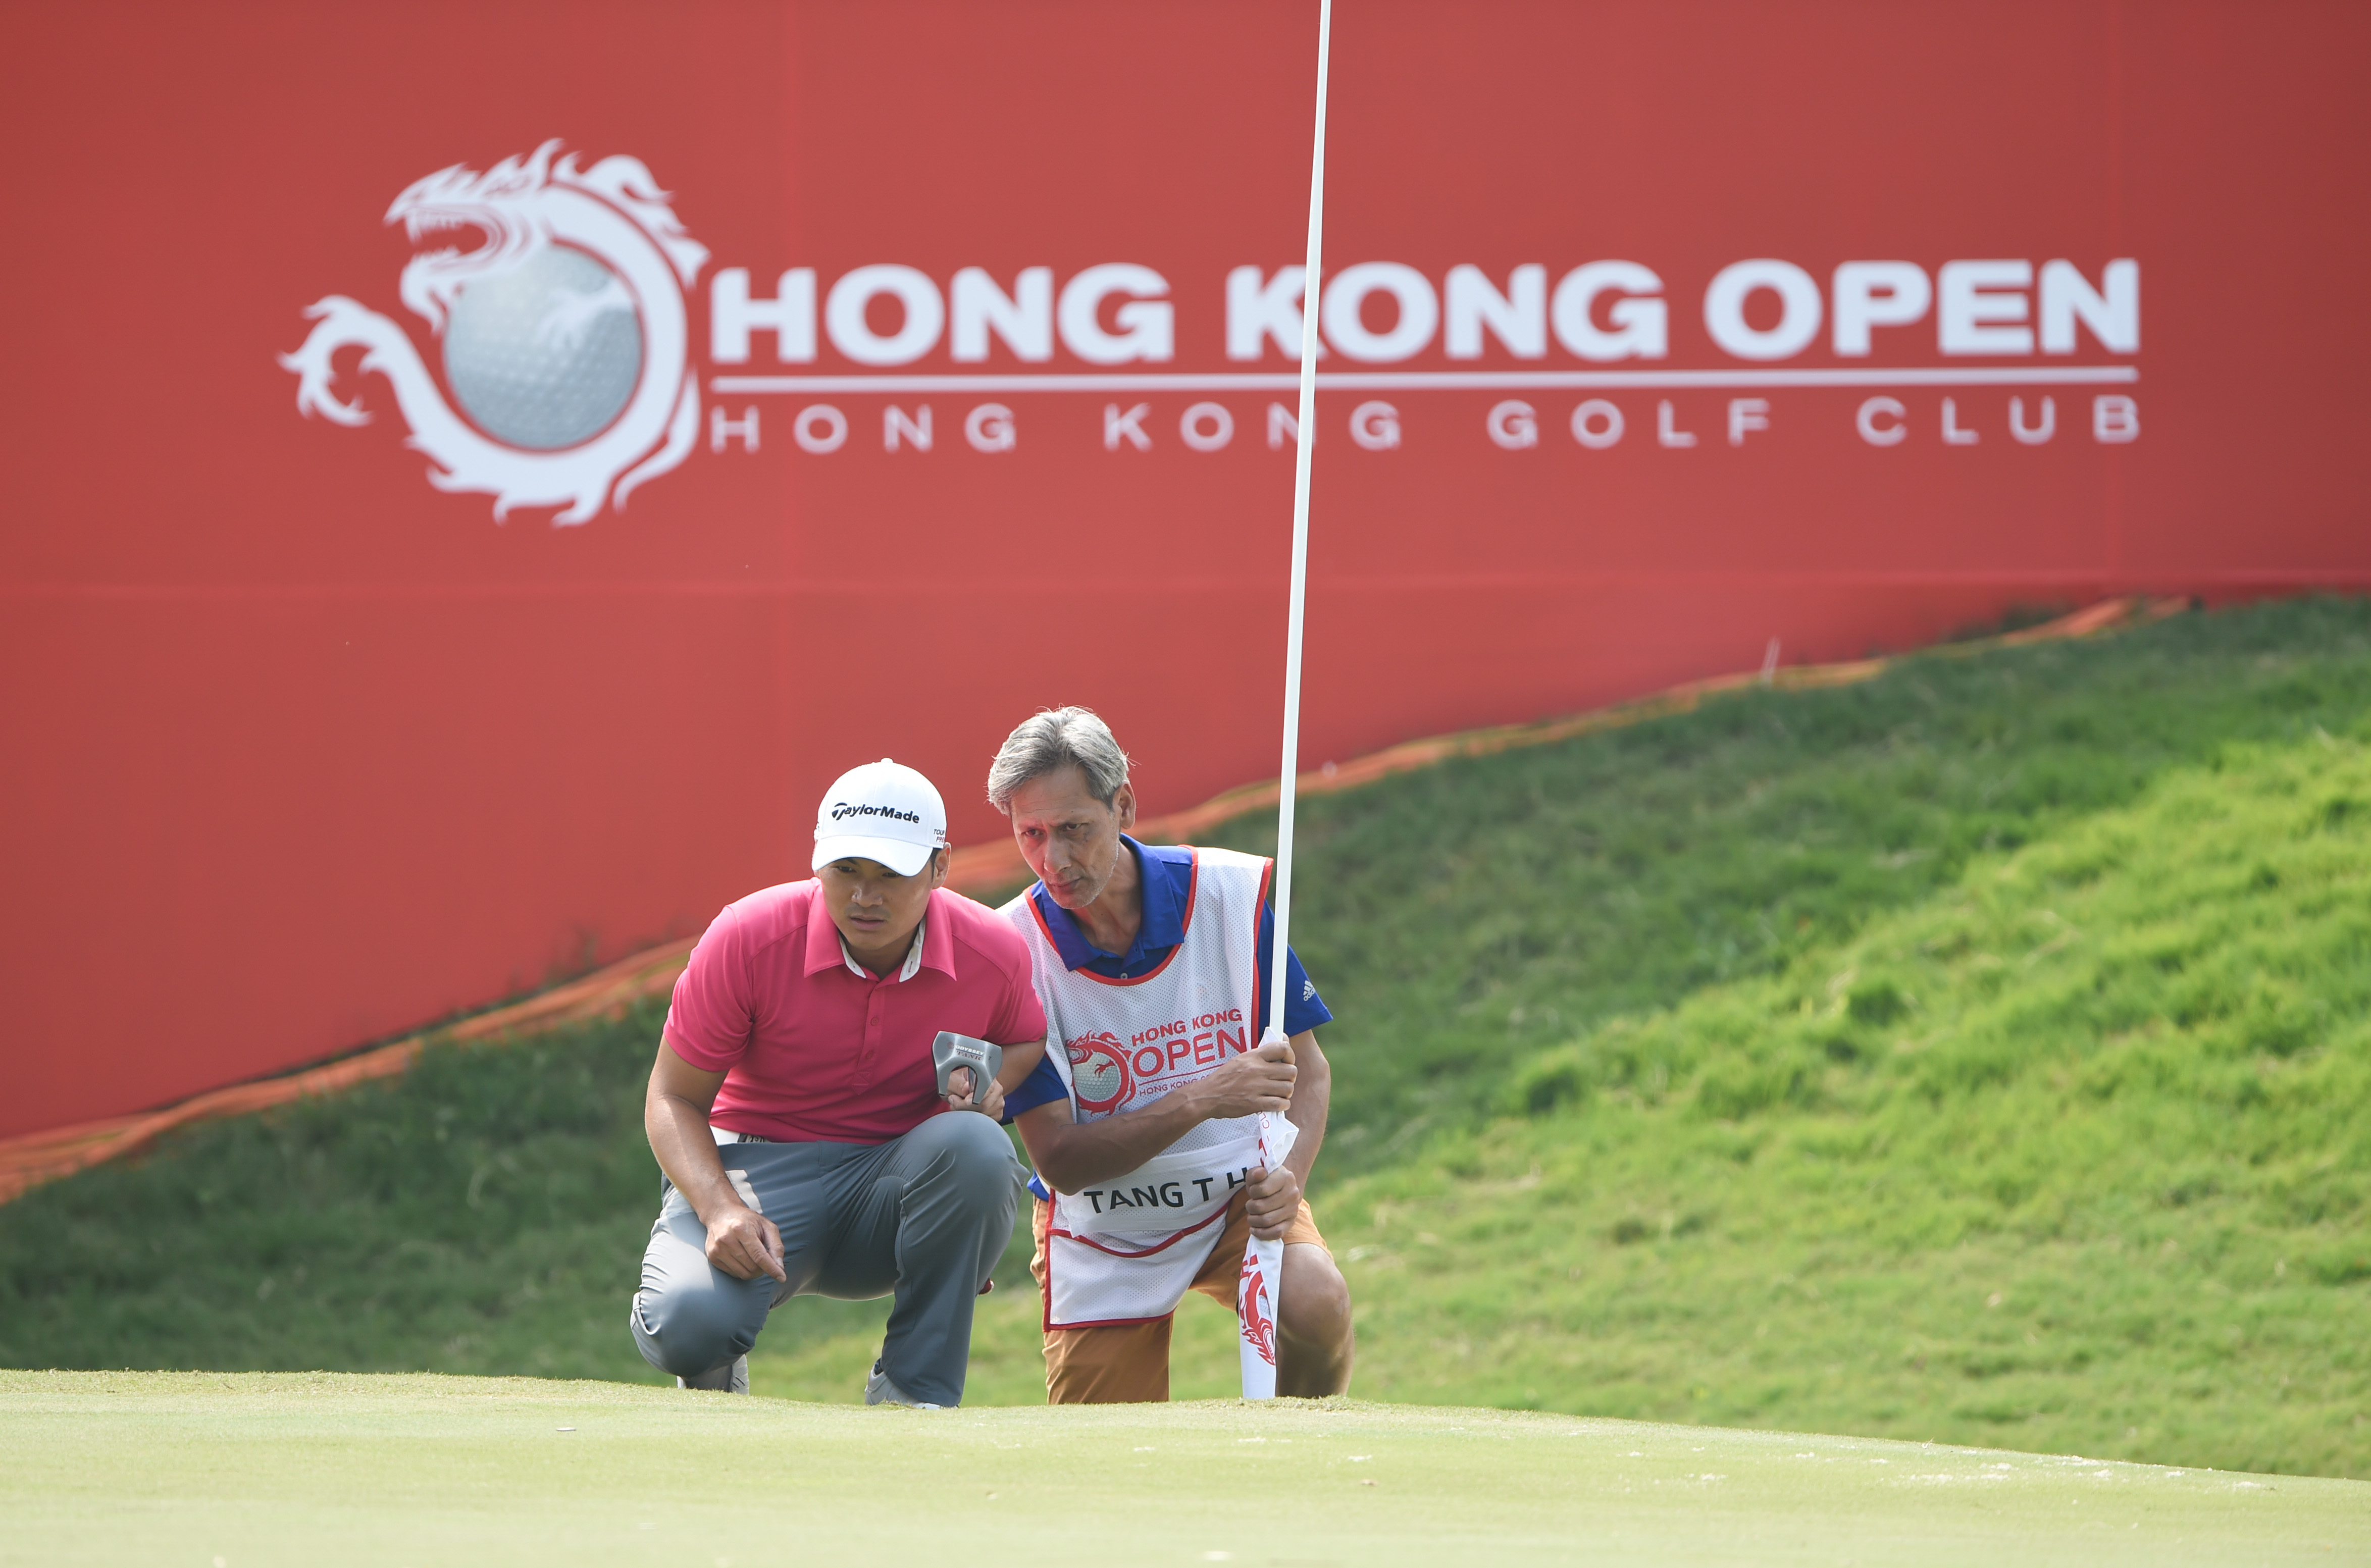 Timothy Tang discusses the layout with his caddie in the first round of the Hong Kong Open. Photo: Richard Castka